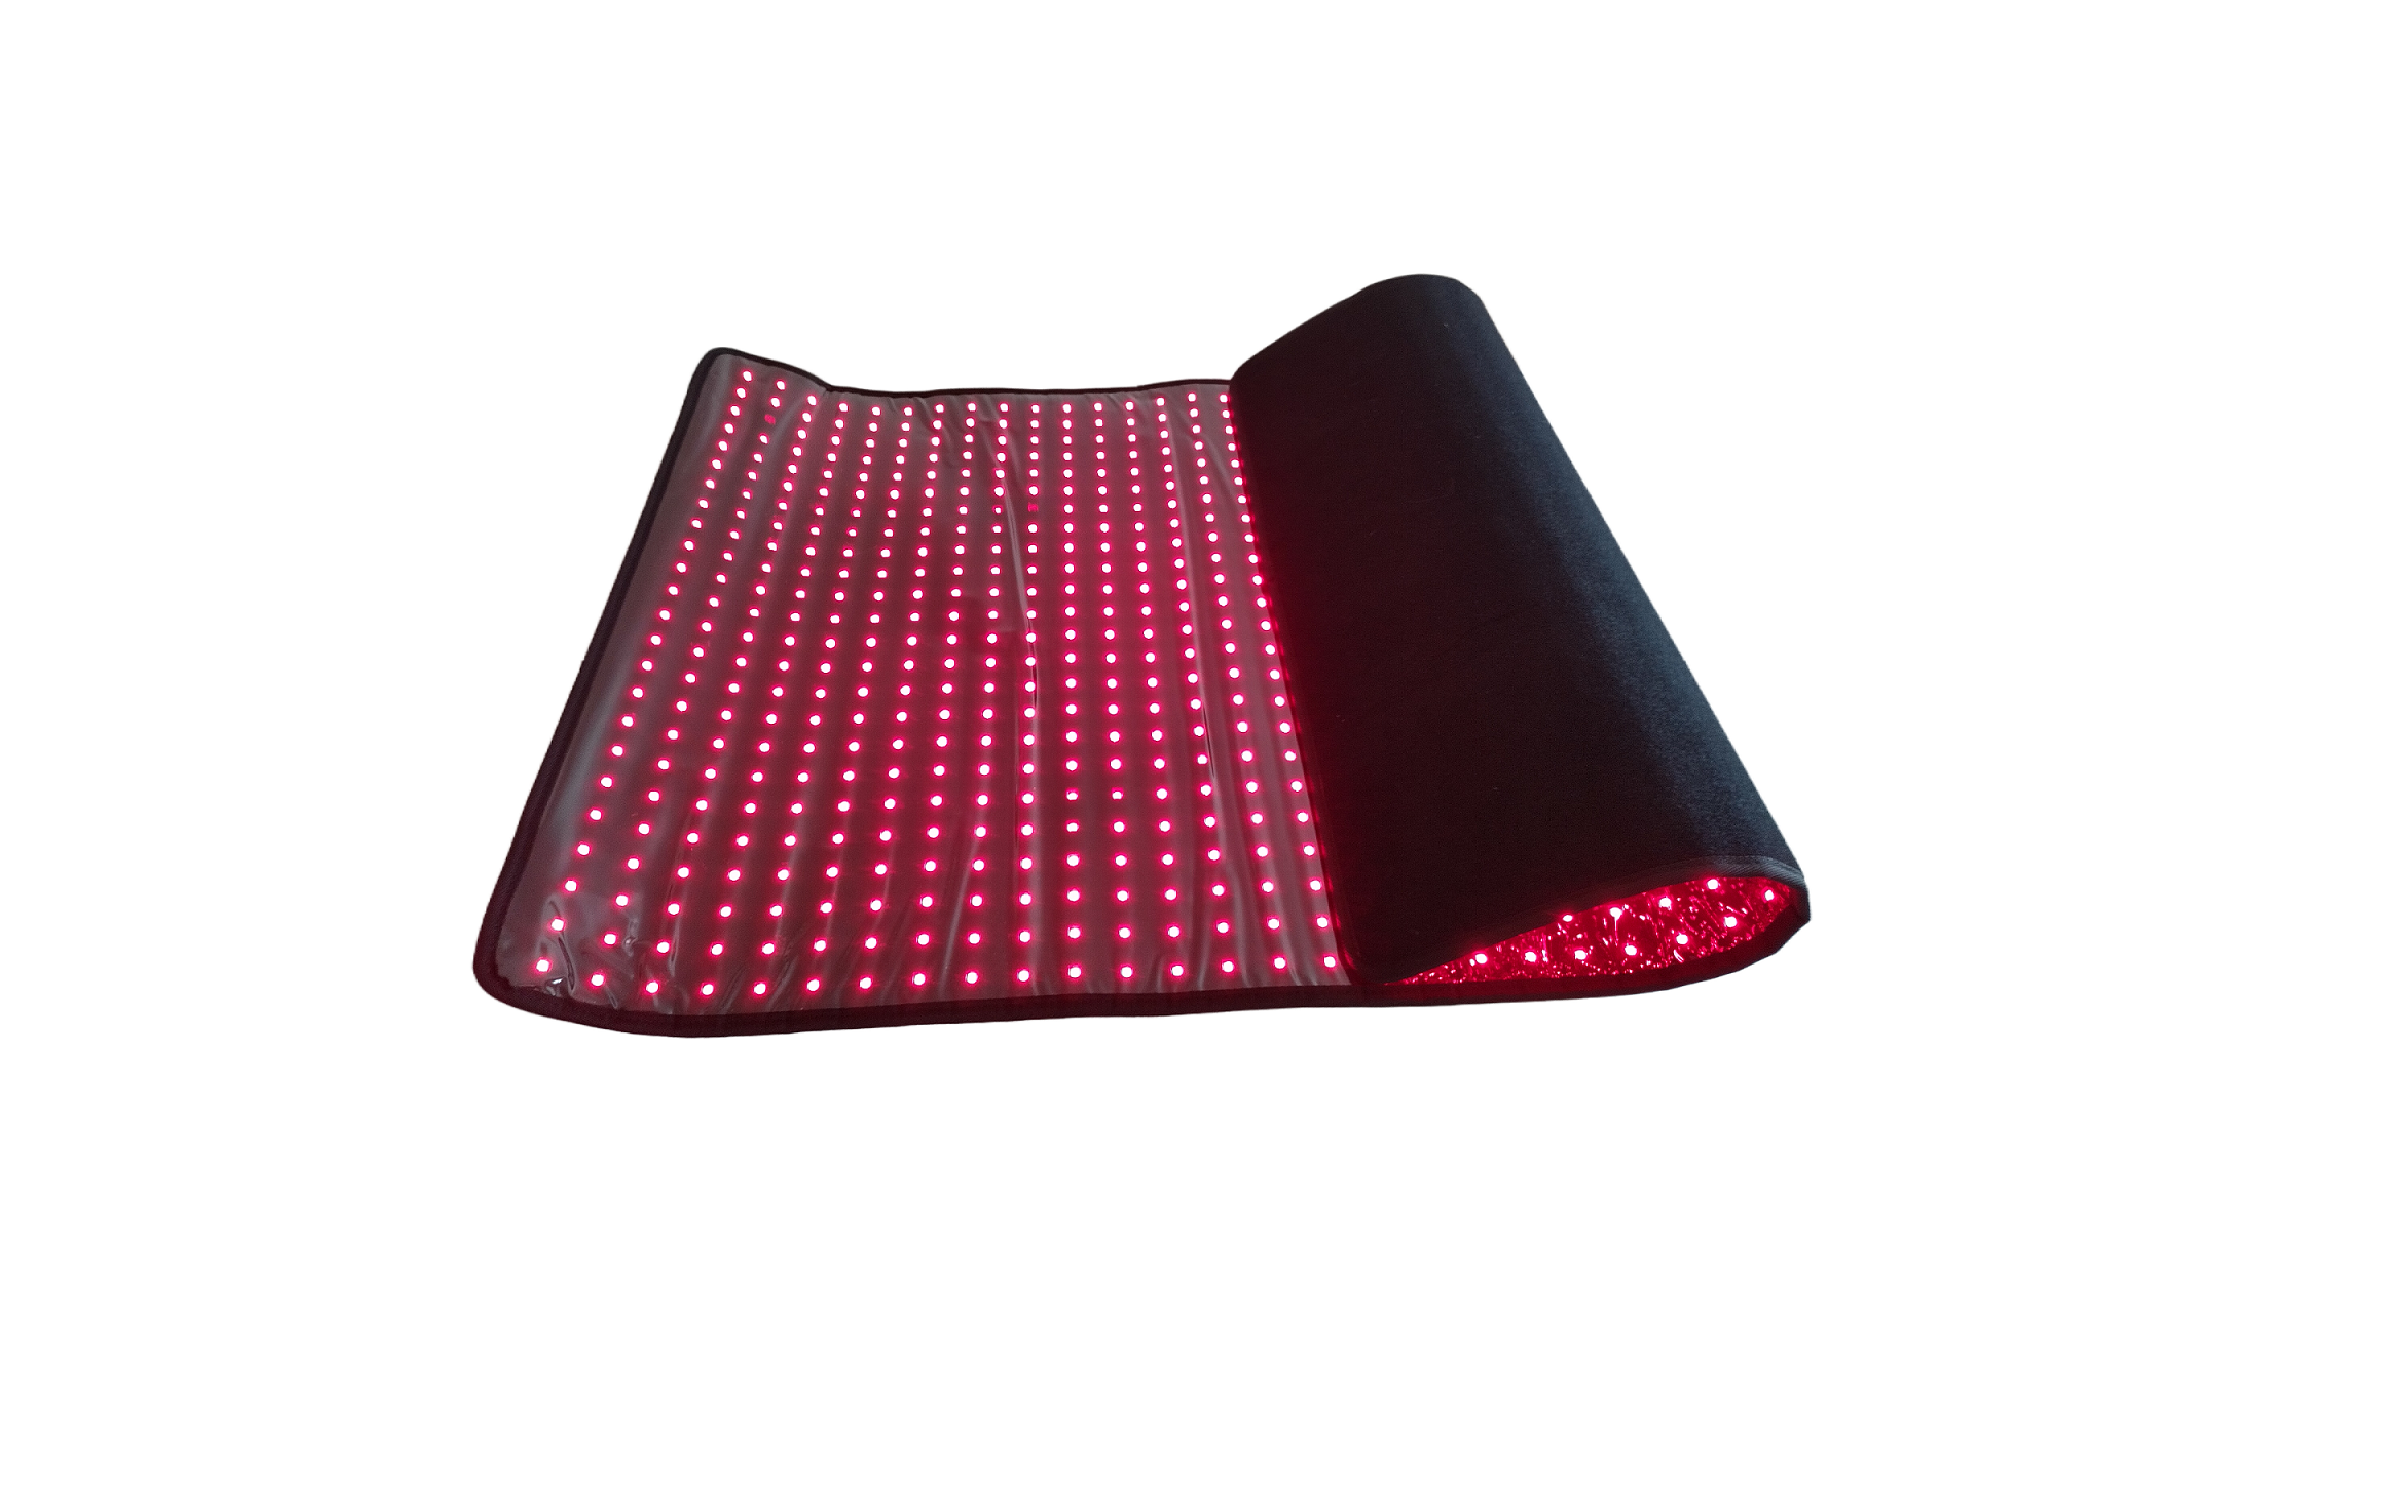 Light therapy flex mat for wound healing, reduction of pain and inflammation